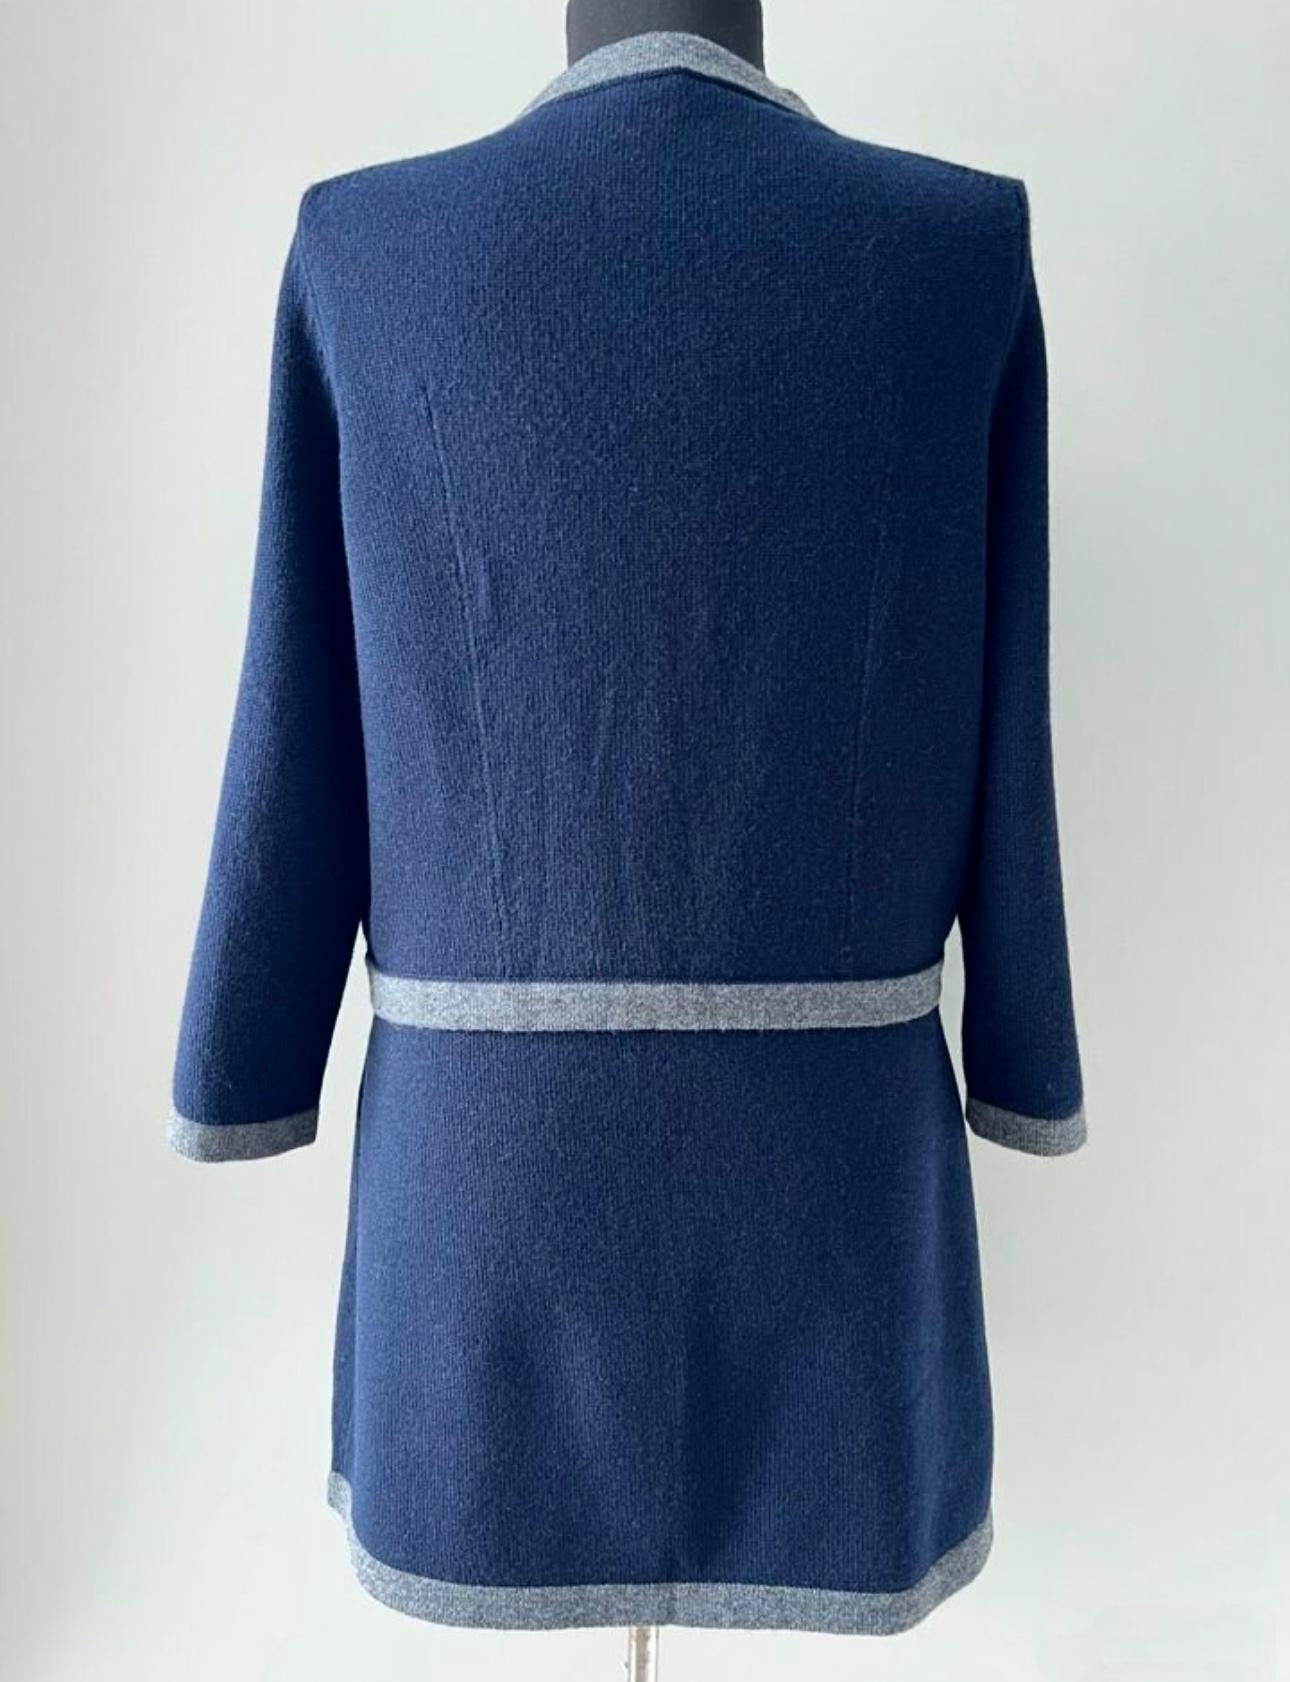 Chanel Sophia Coppola Style New Cashmere Suit For Sale 3